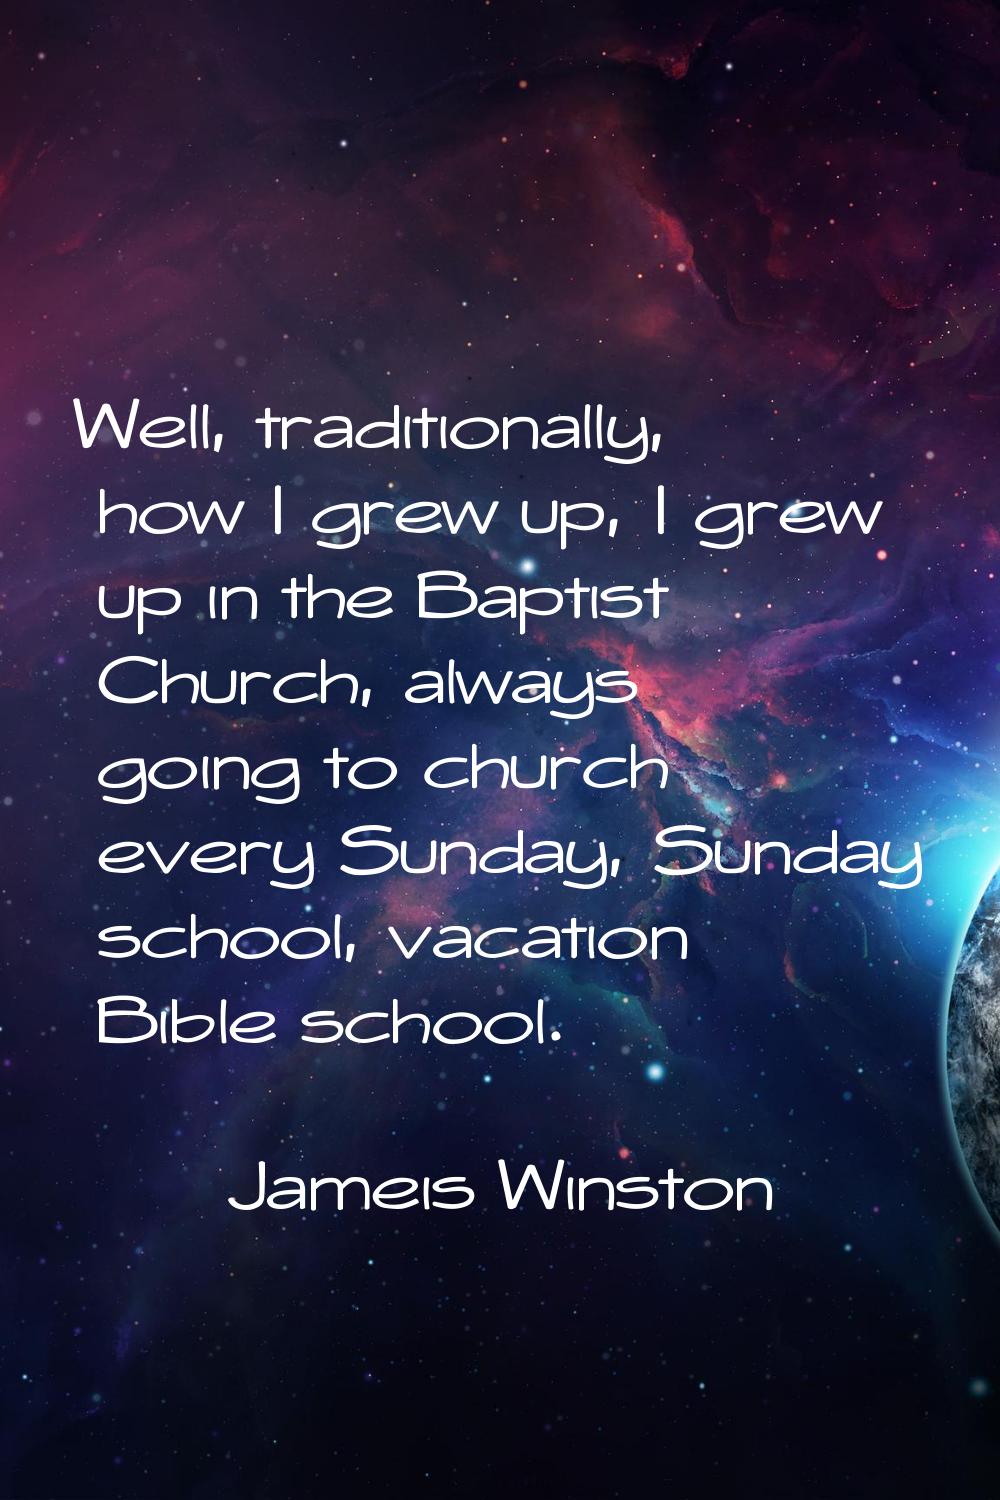 Well, traditionally, how I grew up, I grew up in the Baptist Church, always going to church every S